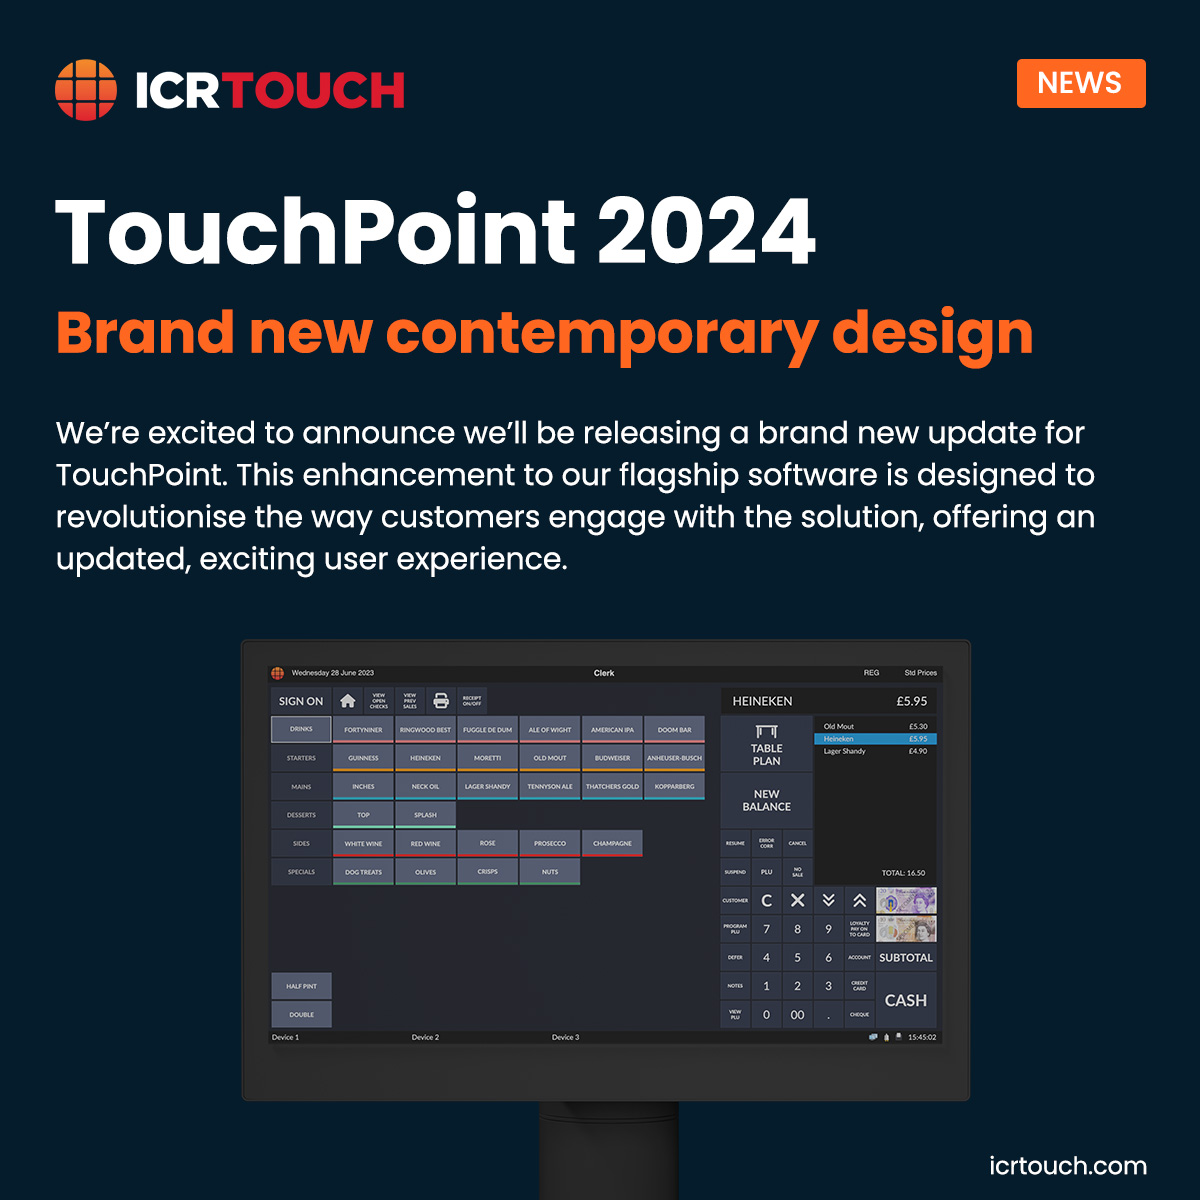 We’re excited to announce we’ll be releasing a brand new update for TouchPoint ✨

Read the full article here: bit.ly/4dTBwm2

#weareICRTouch #TouchPoint